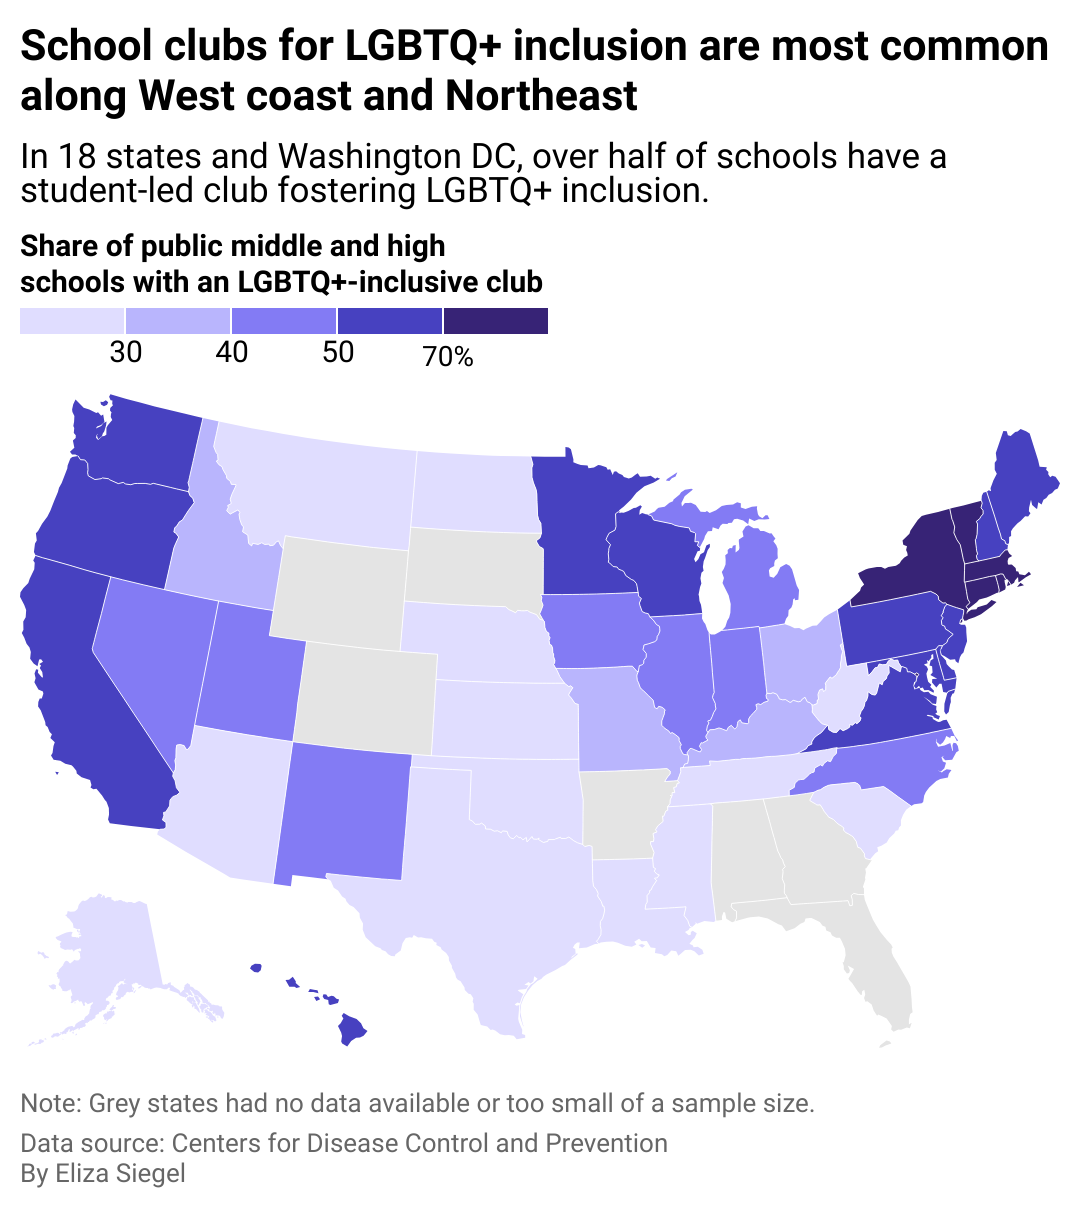 Public middle and high school student-led clubs for LGBTQ+ inclusion are most common along the West Coast and in the Northeast and least common in the South and in the Northern mountain states.